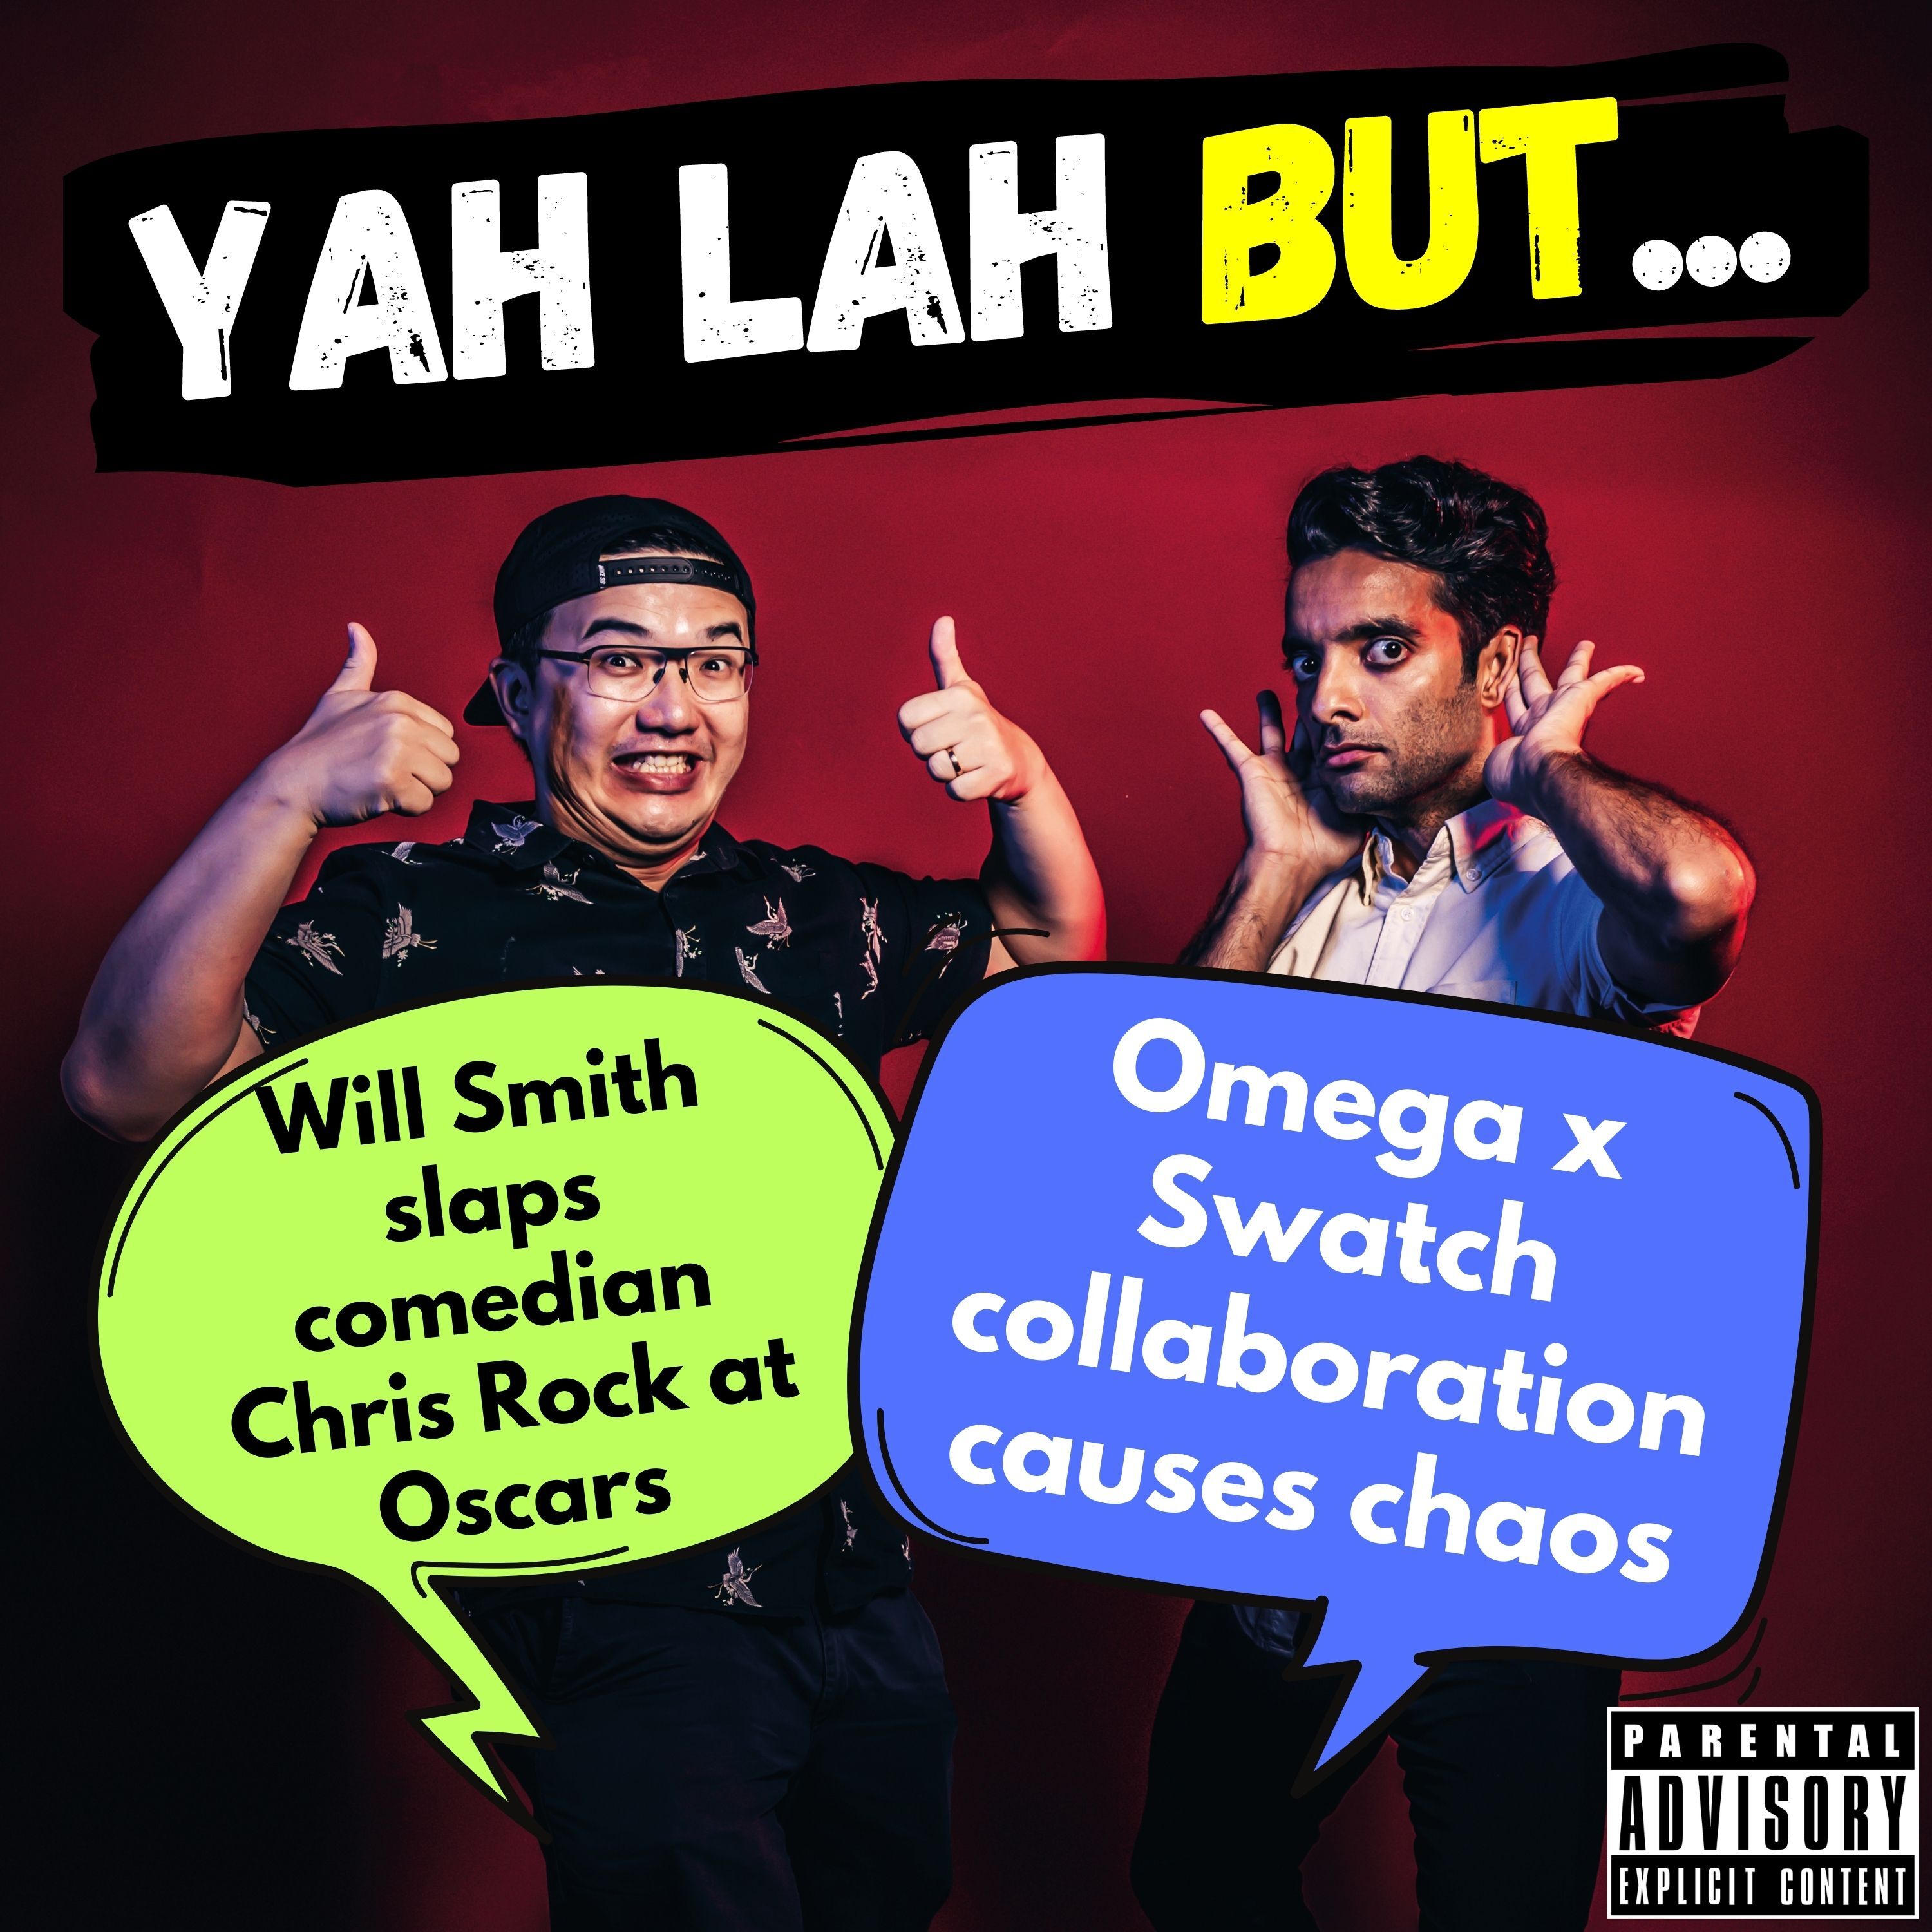 #279 - Will Smith slaps Chris Rock at Oscars & Omega x Swatch collaboration causes chaos in SG